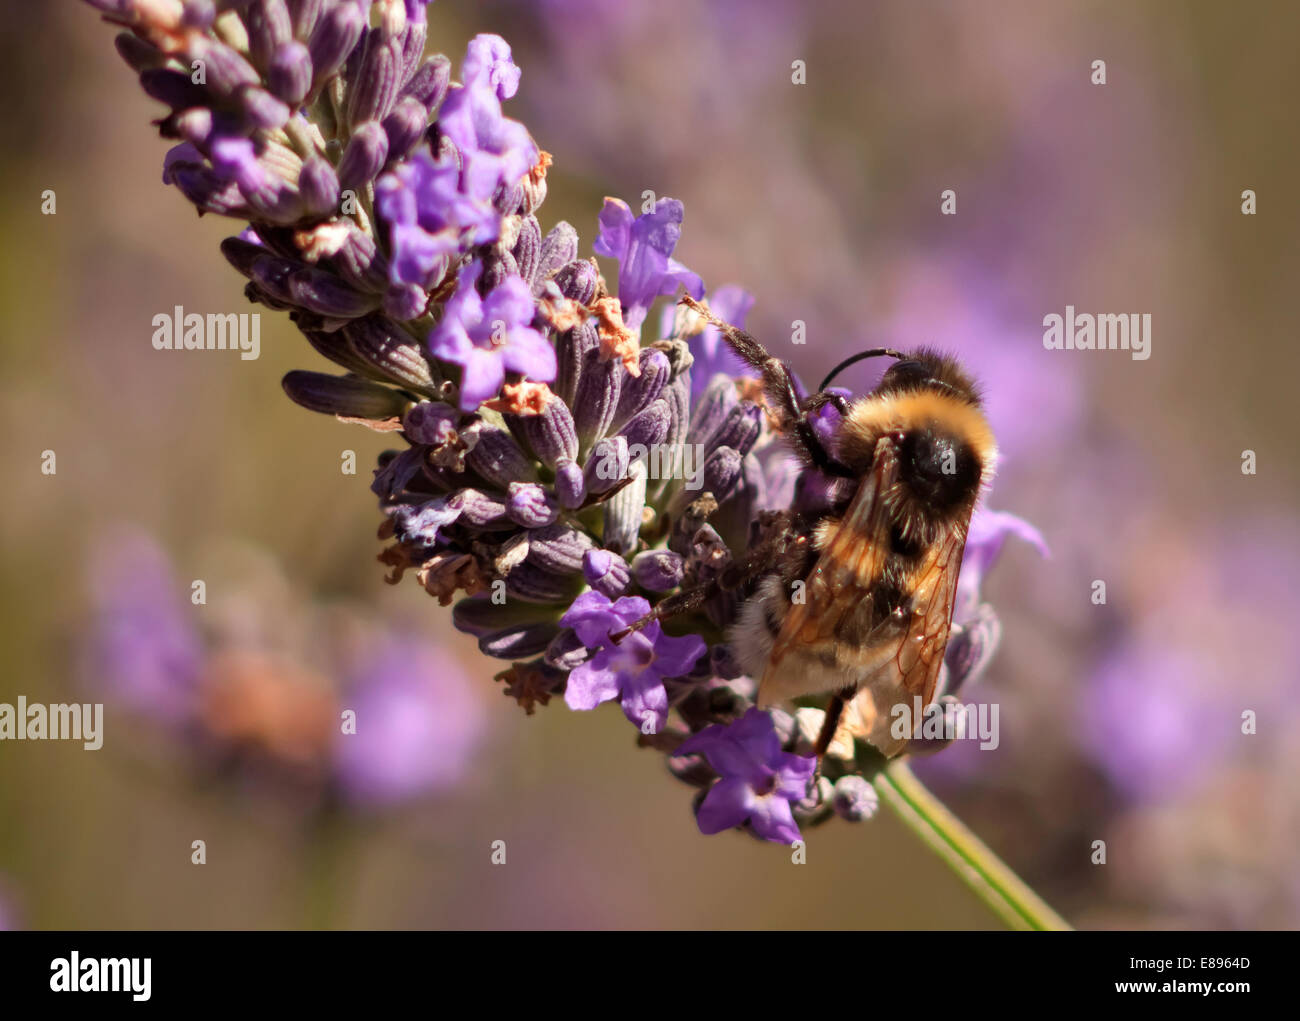 Bumble bee on lilac plant Stock Photo